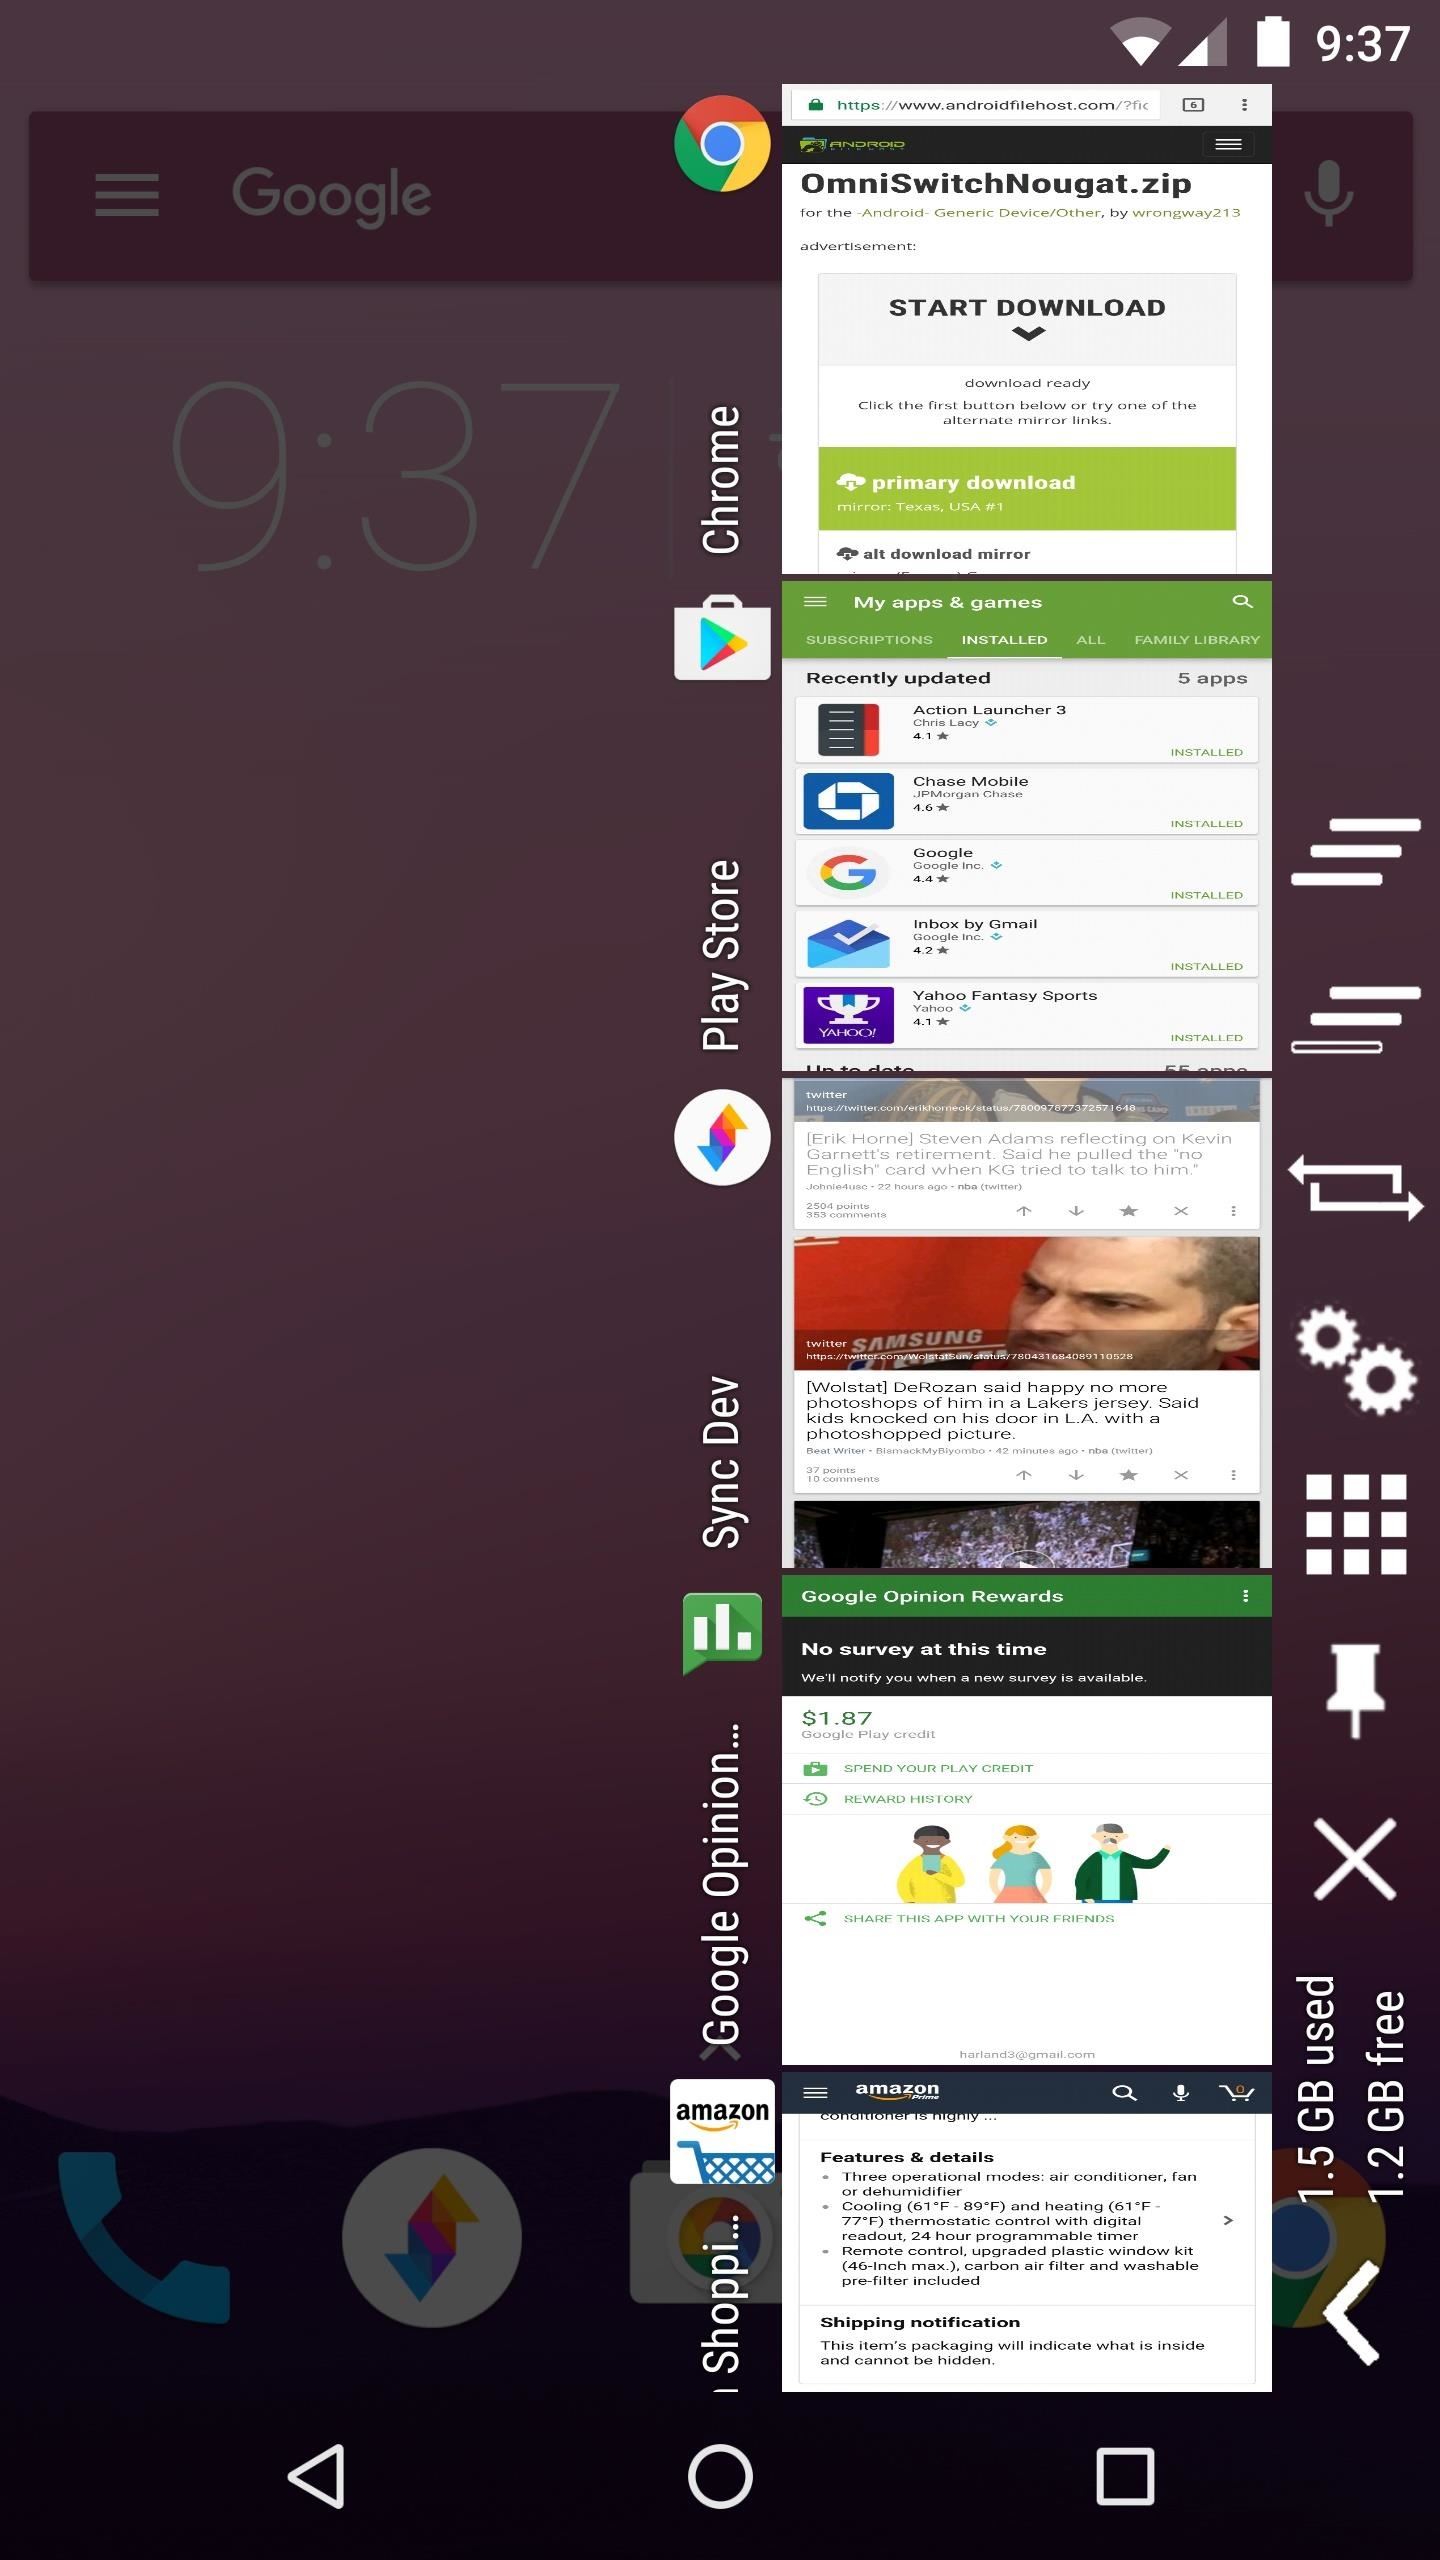 How to Install OmniSwitch for Advanced Multitasking on Android Nougat